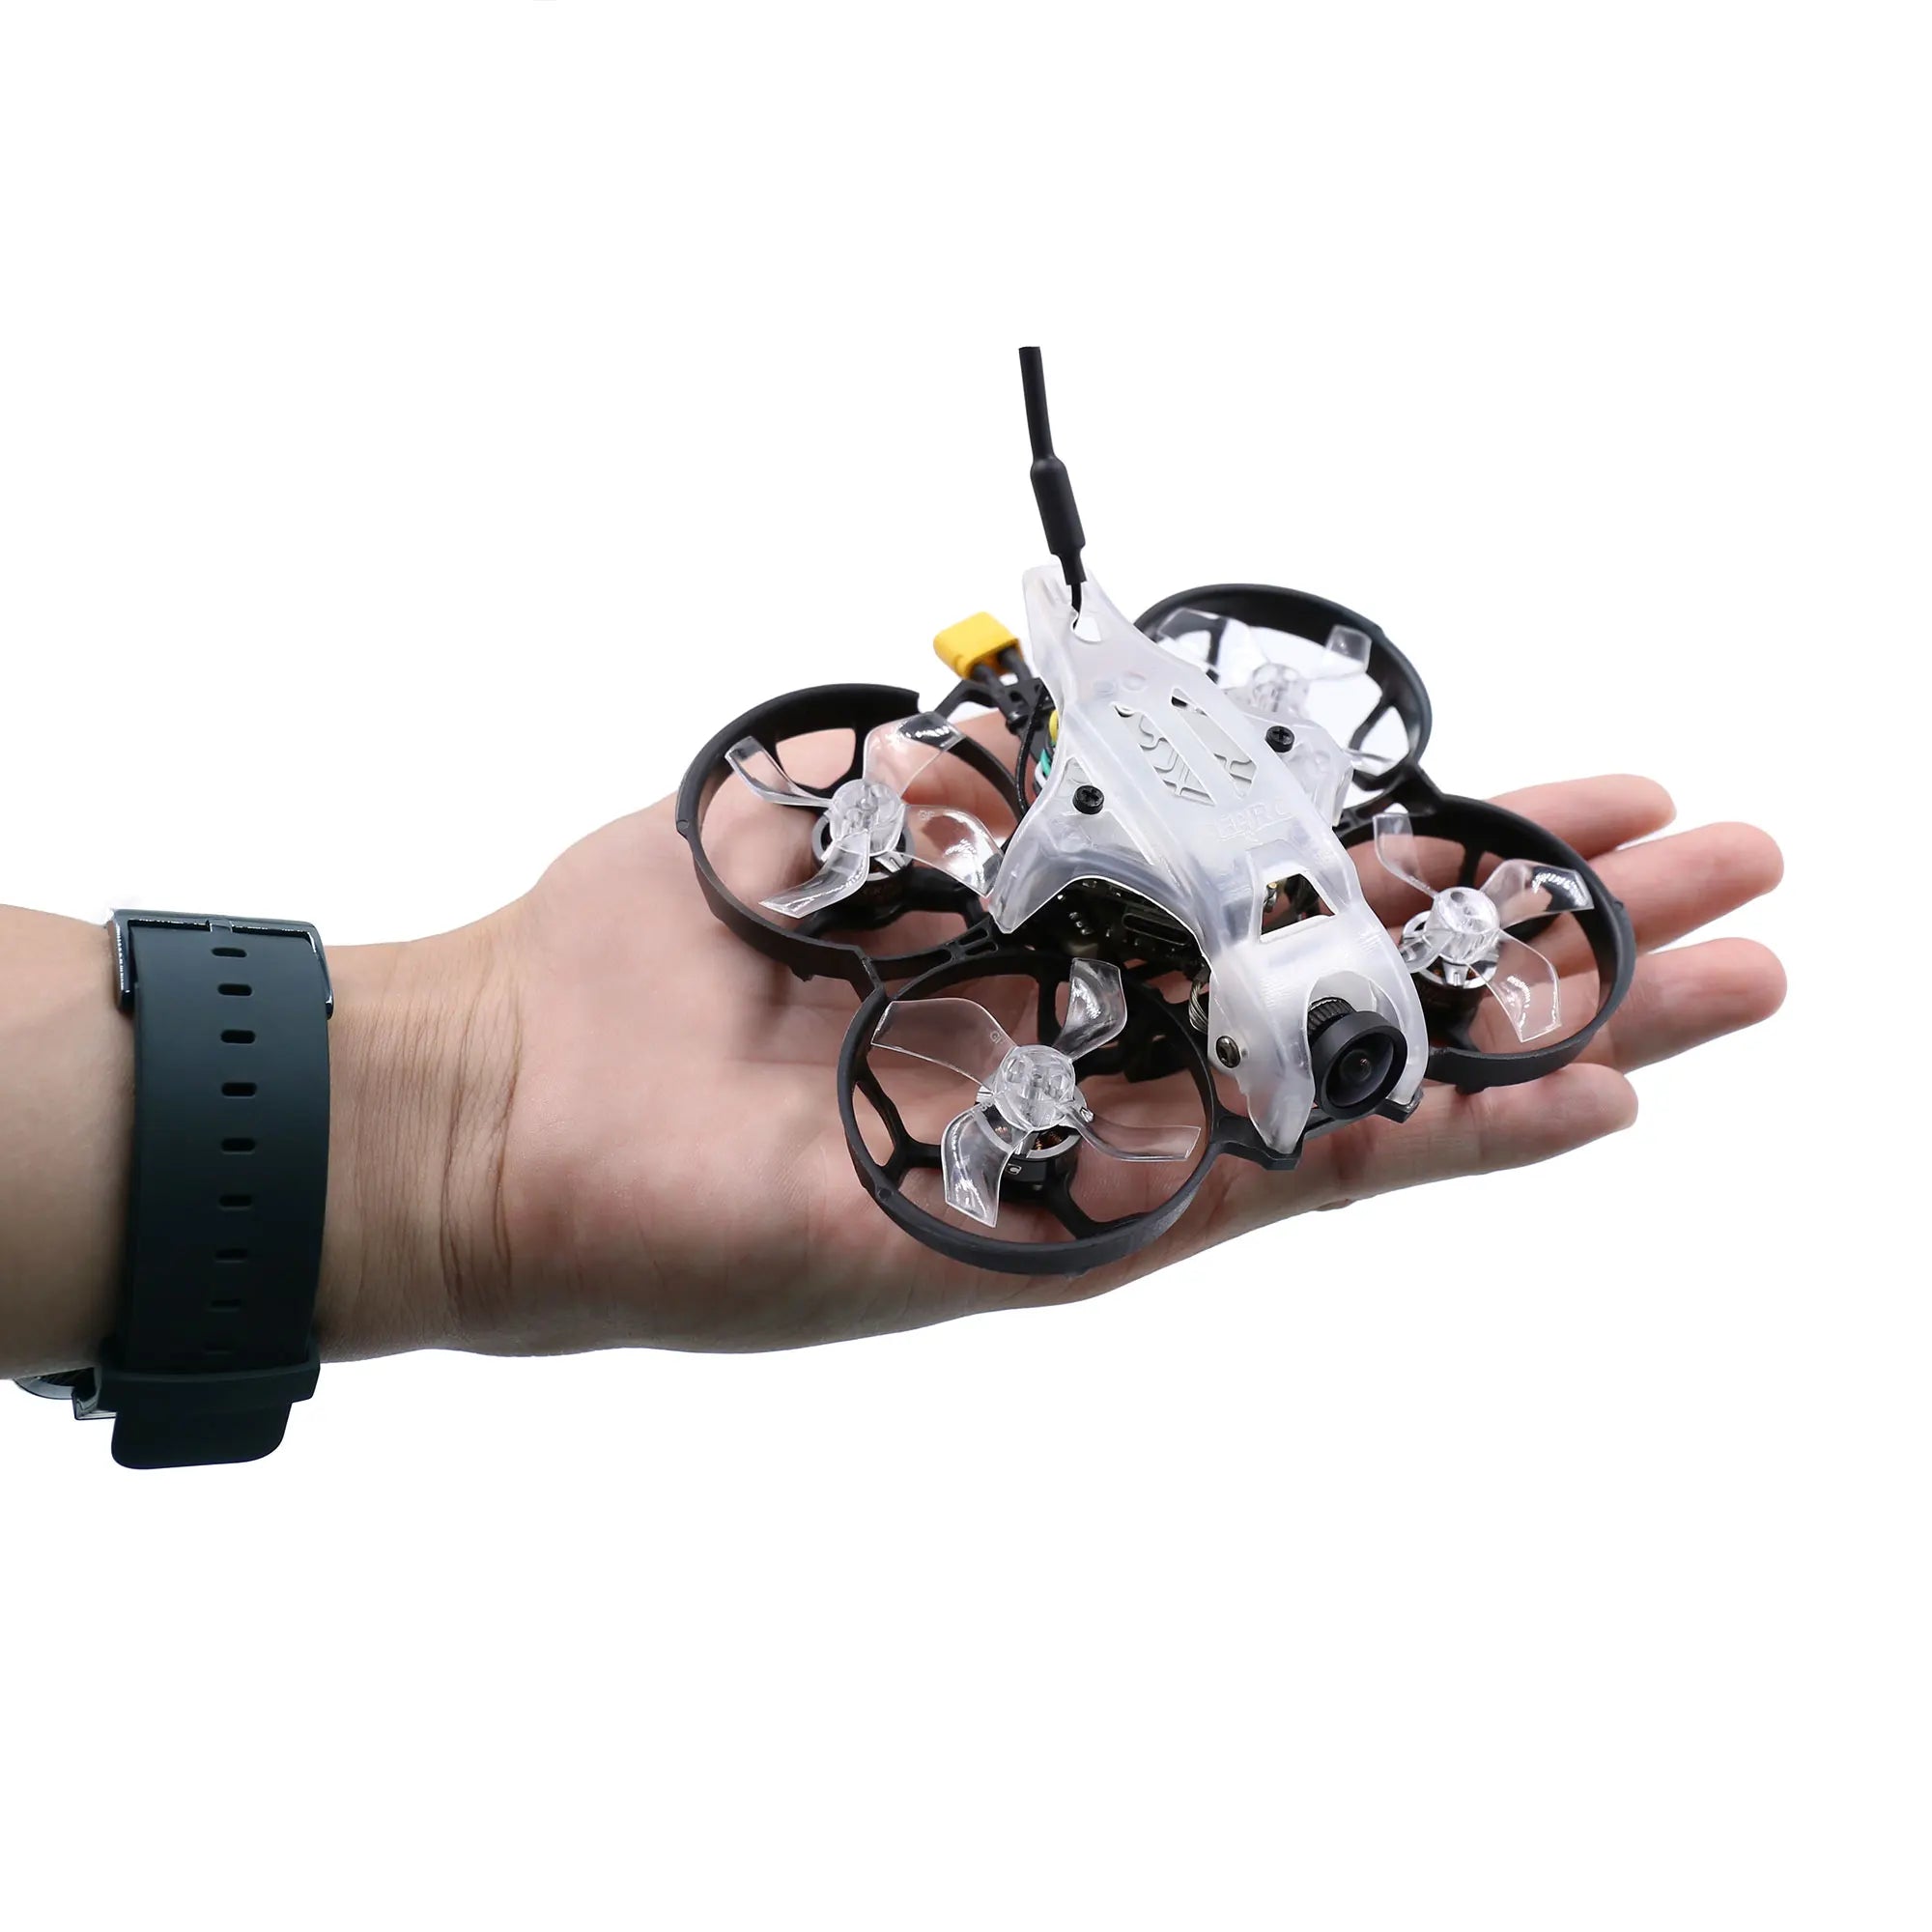 GEPRC Thinking P16 FPV Drone, this highly efficient powertrain gives you 4 minutes of indoor acrobatics